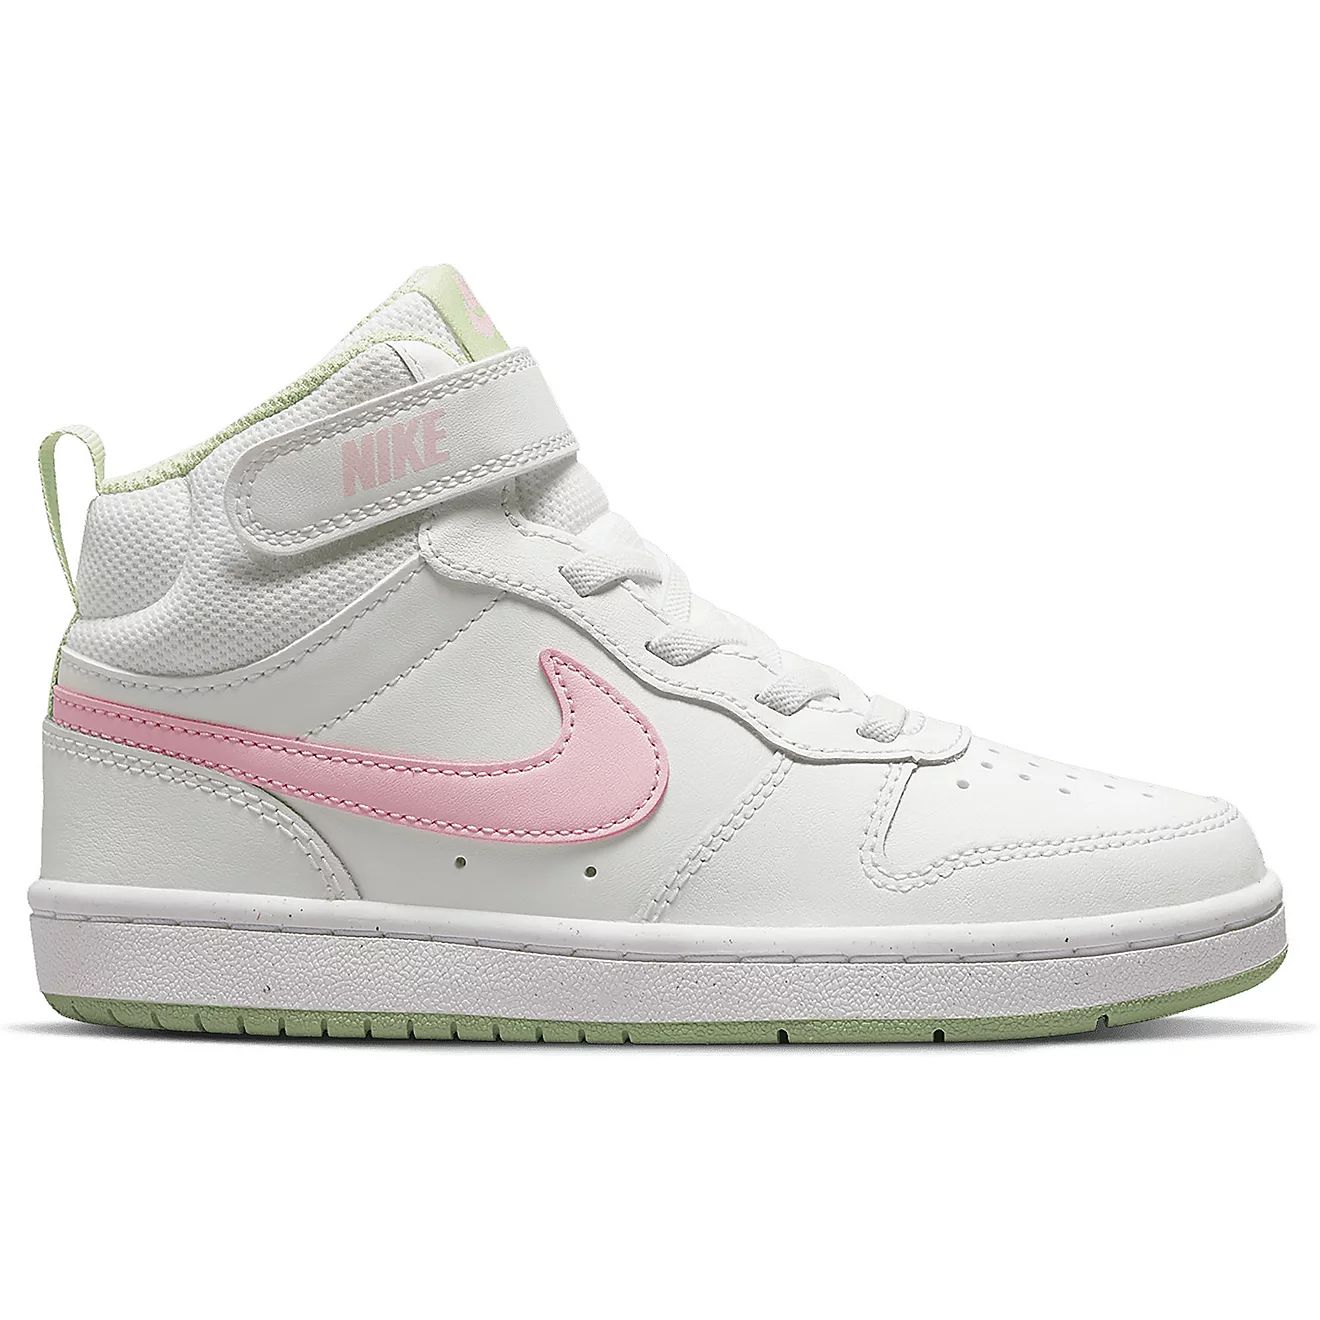 Nike Girls' Court Borough Mid 2 Shoes | Academy Sports + Outdoors